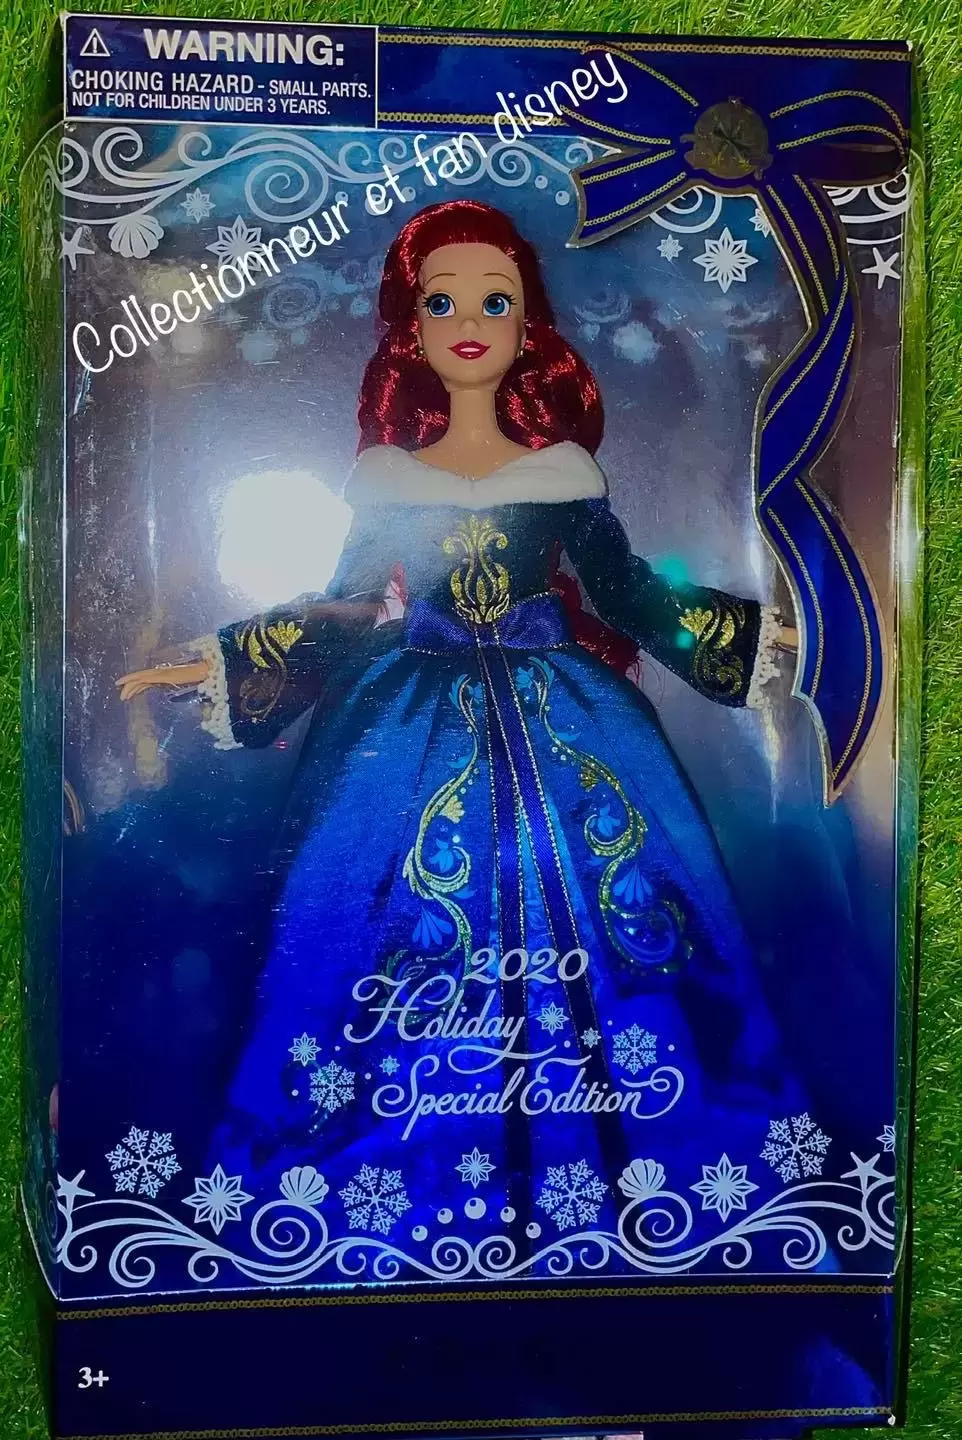 Disney Store Classic Dolls - Ariel holiday Special Edition